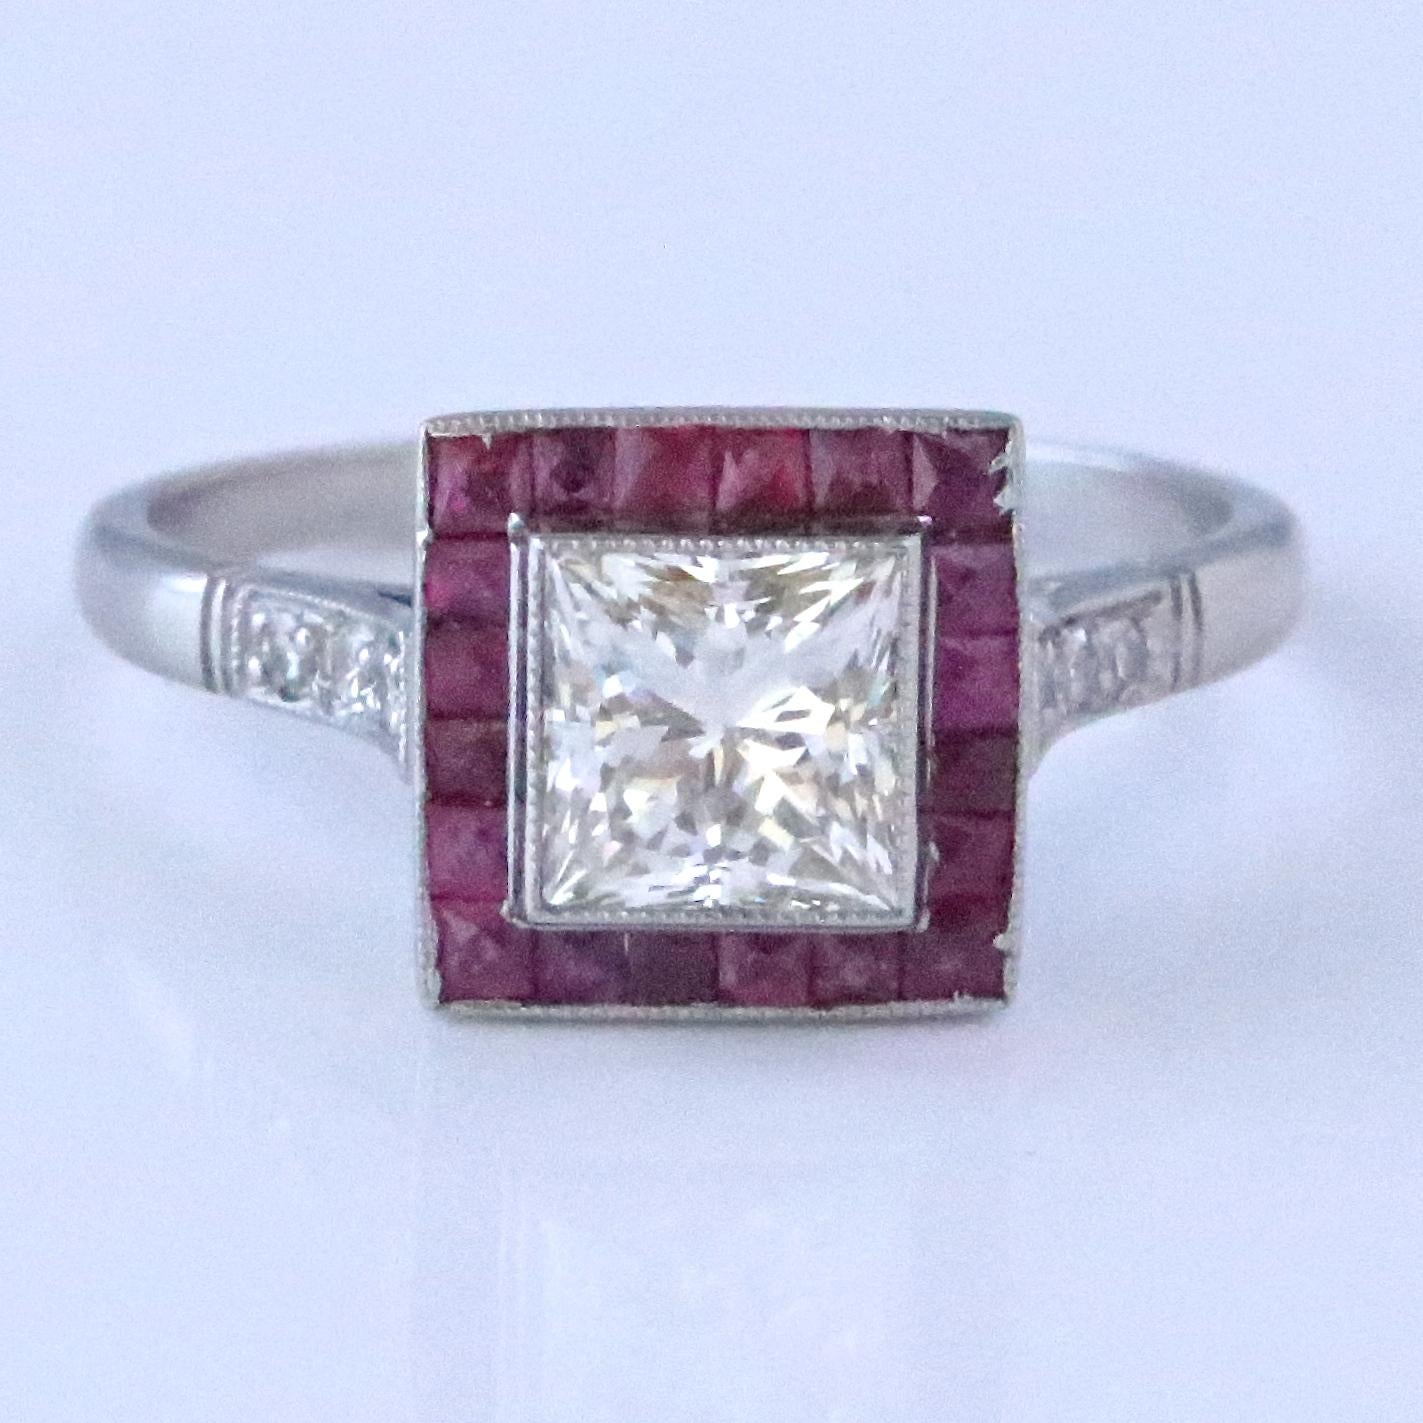 The Art Deco style never gets old! The dancing, the cocktails, the lifestyle, all the things the Roaring 20's are known for. Feel yourself like a 1920's fashionista wearing this gorgeous Art Deco Inspired Diamond Ruby Ring. The ring features a